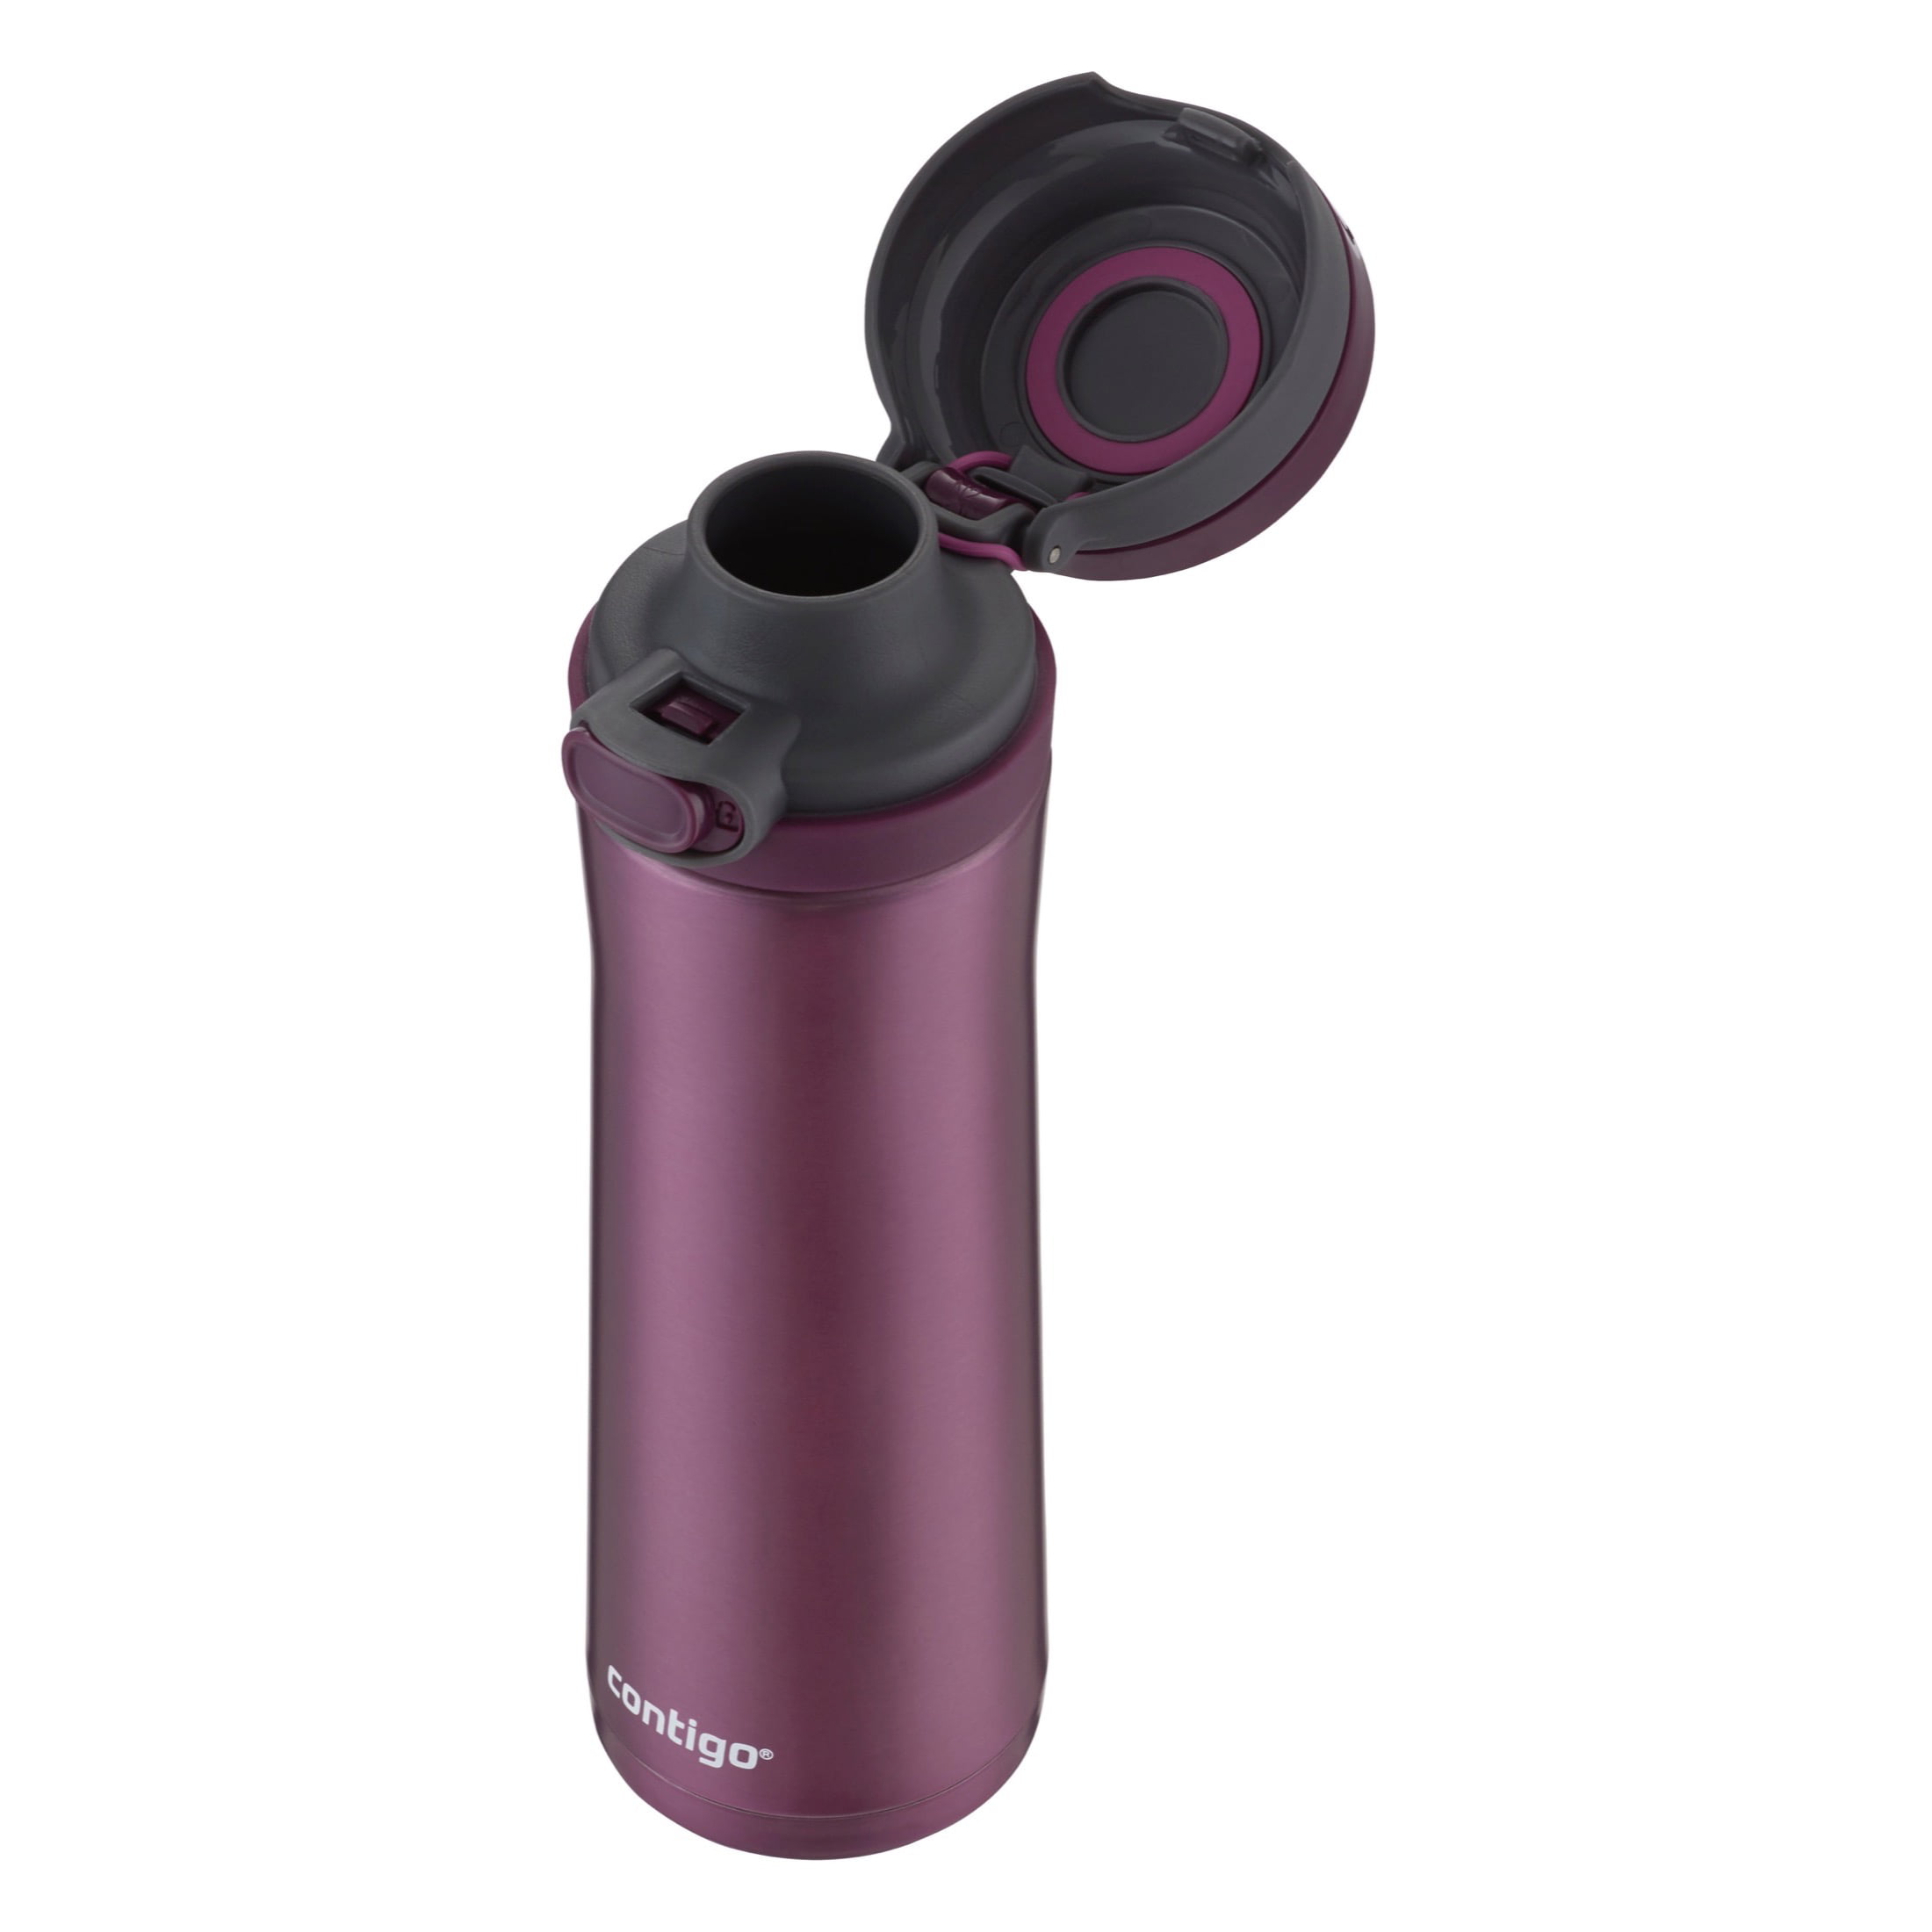 Contigo 20 oz. Purity Glass Water Bottle with Tethered Lid - Radiant Orchid  